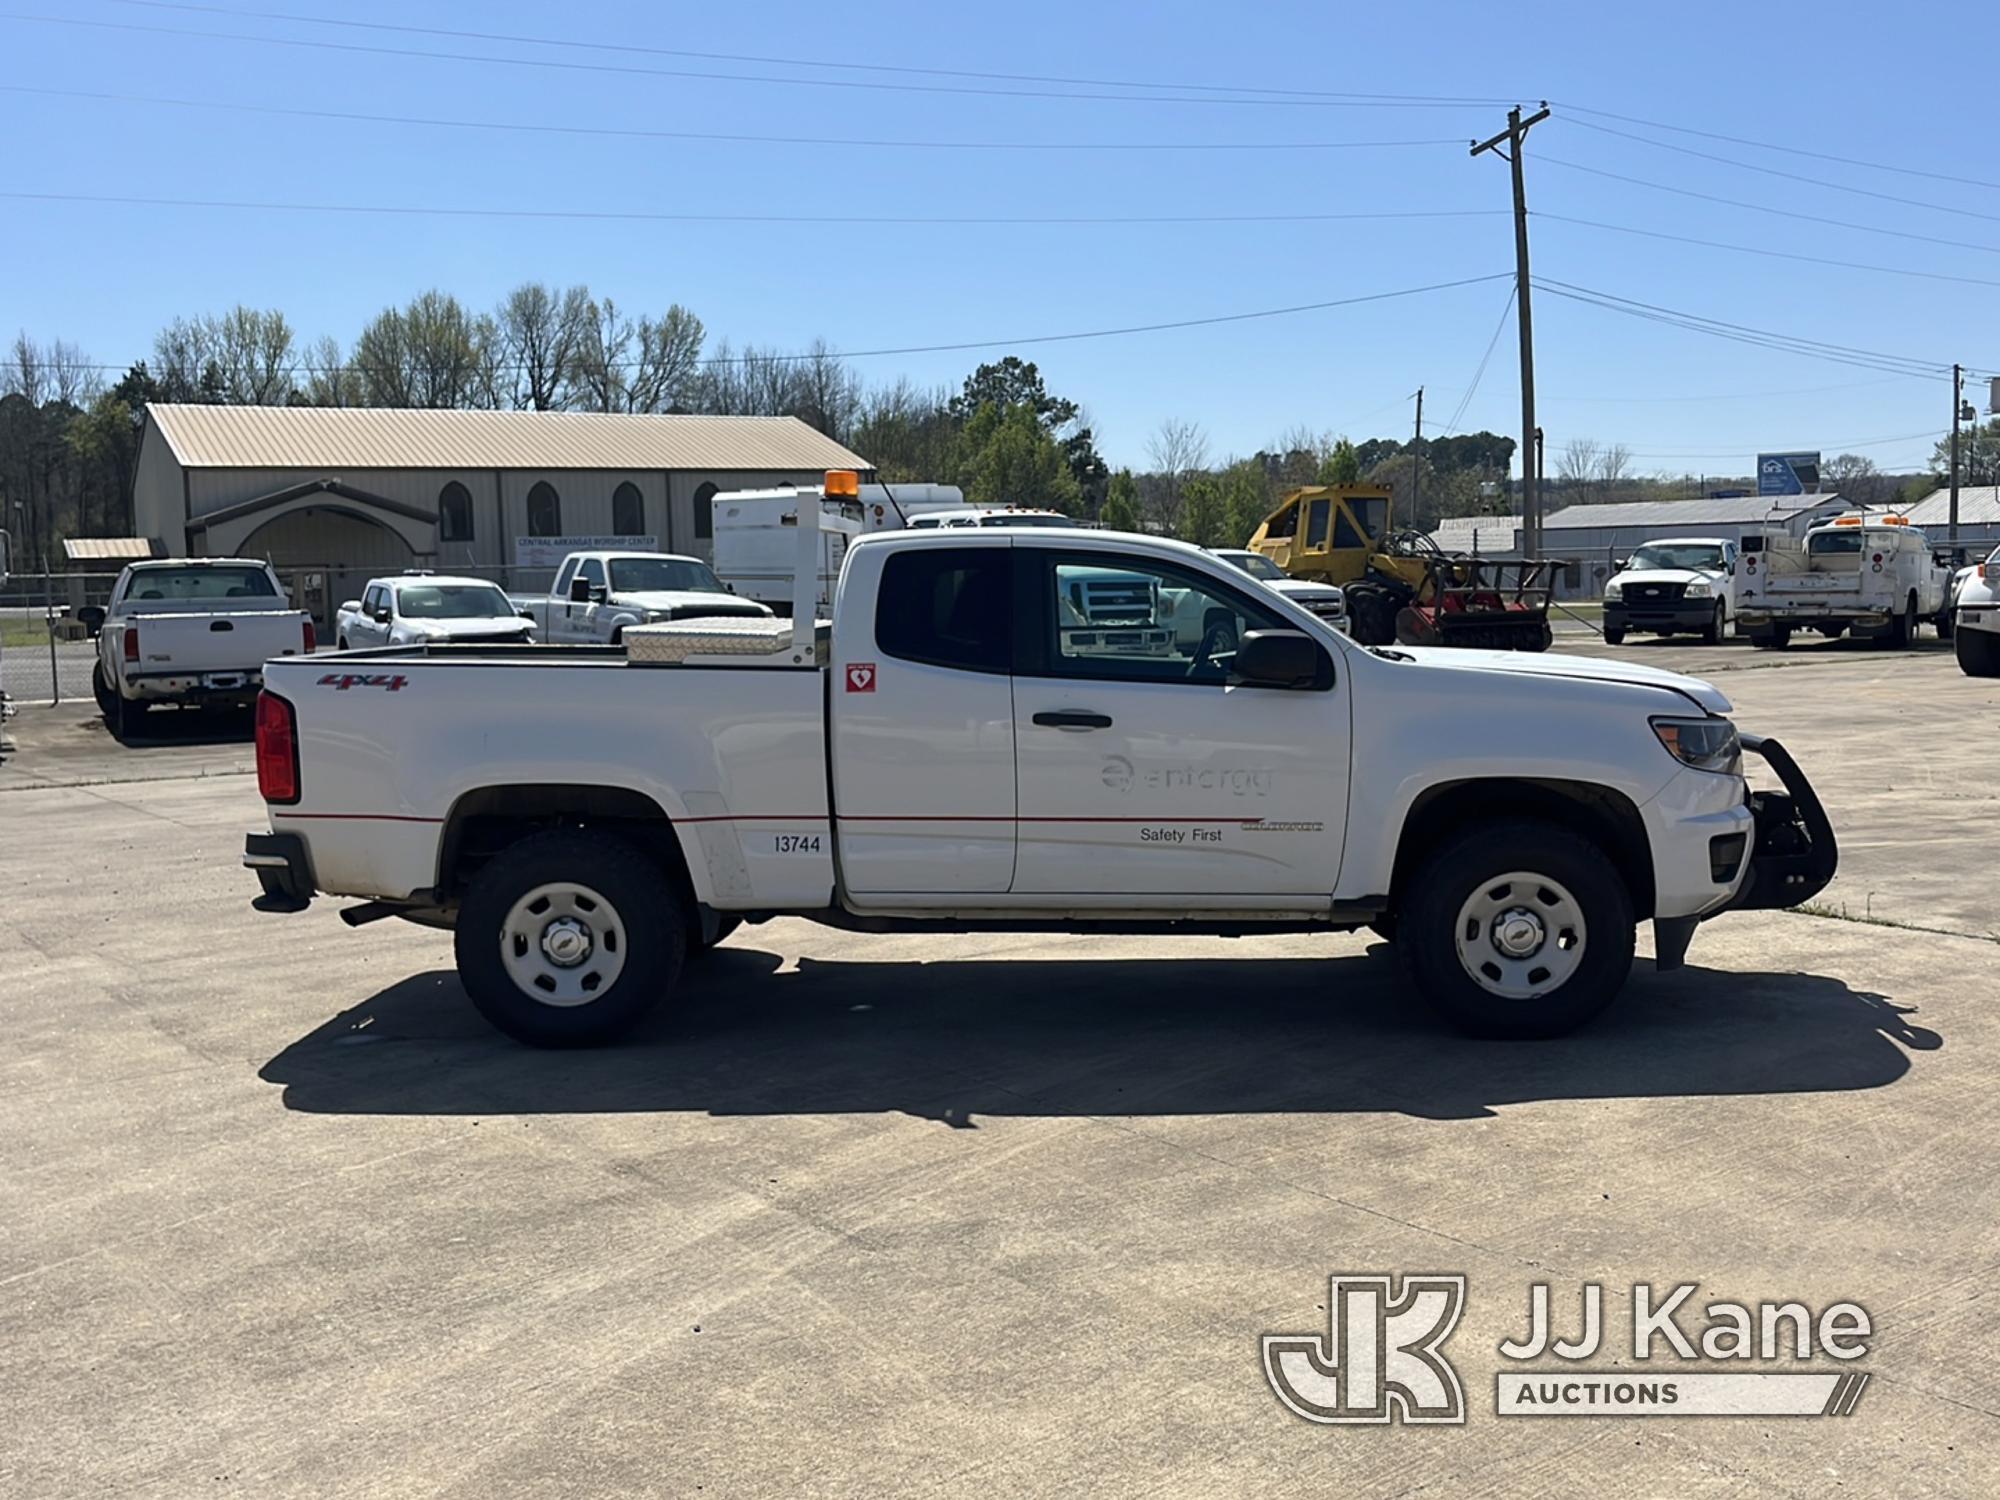 (Conway, AR) 2015 Chevrolet Colorado 4x4 Extended-Cab Pickup Truck Runs & Moves) (Service Messages O